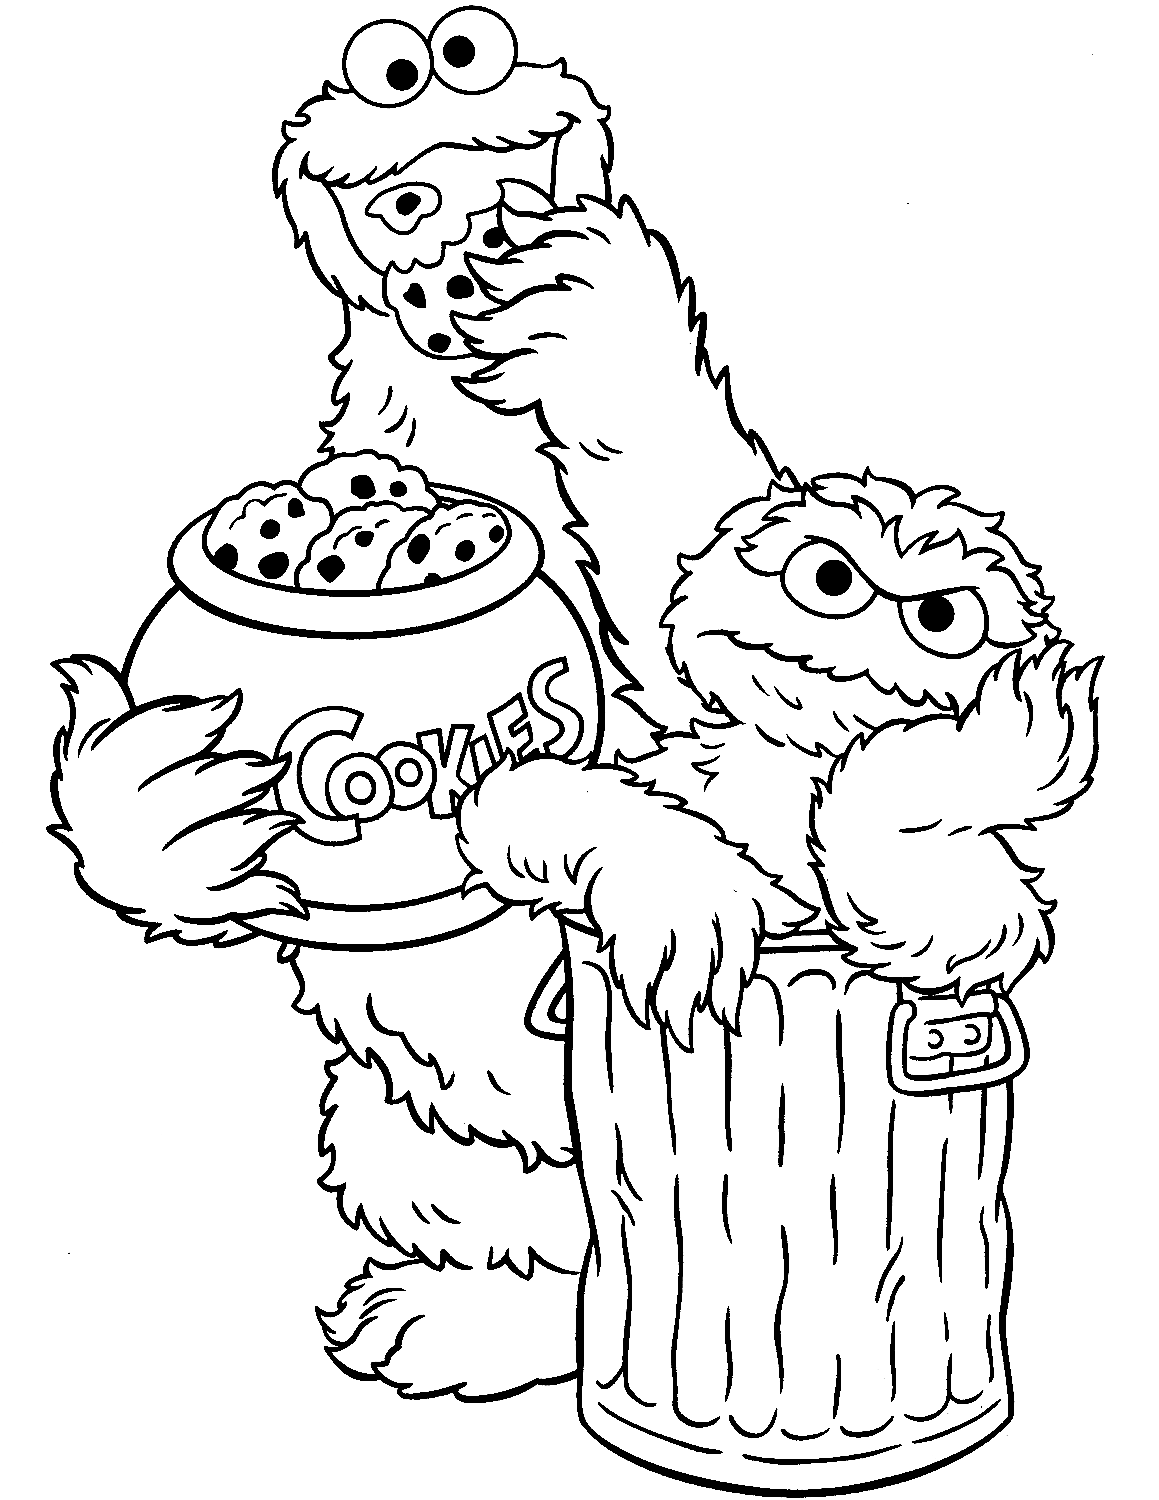 Elmo and Cookie Monster Coloring Page